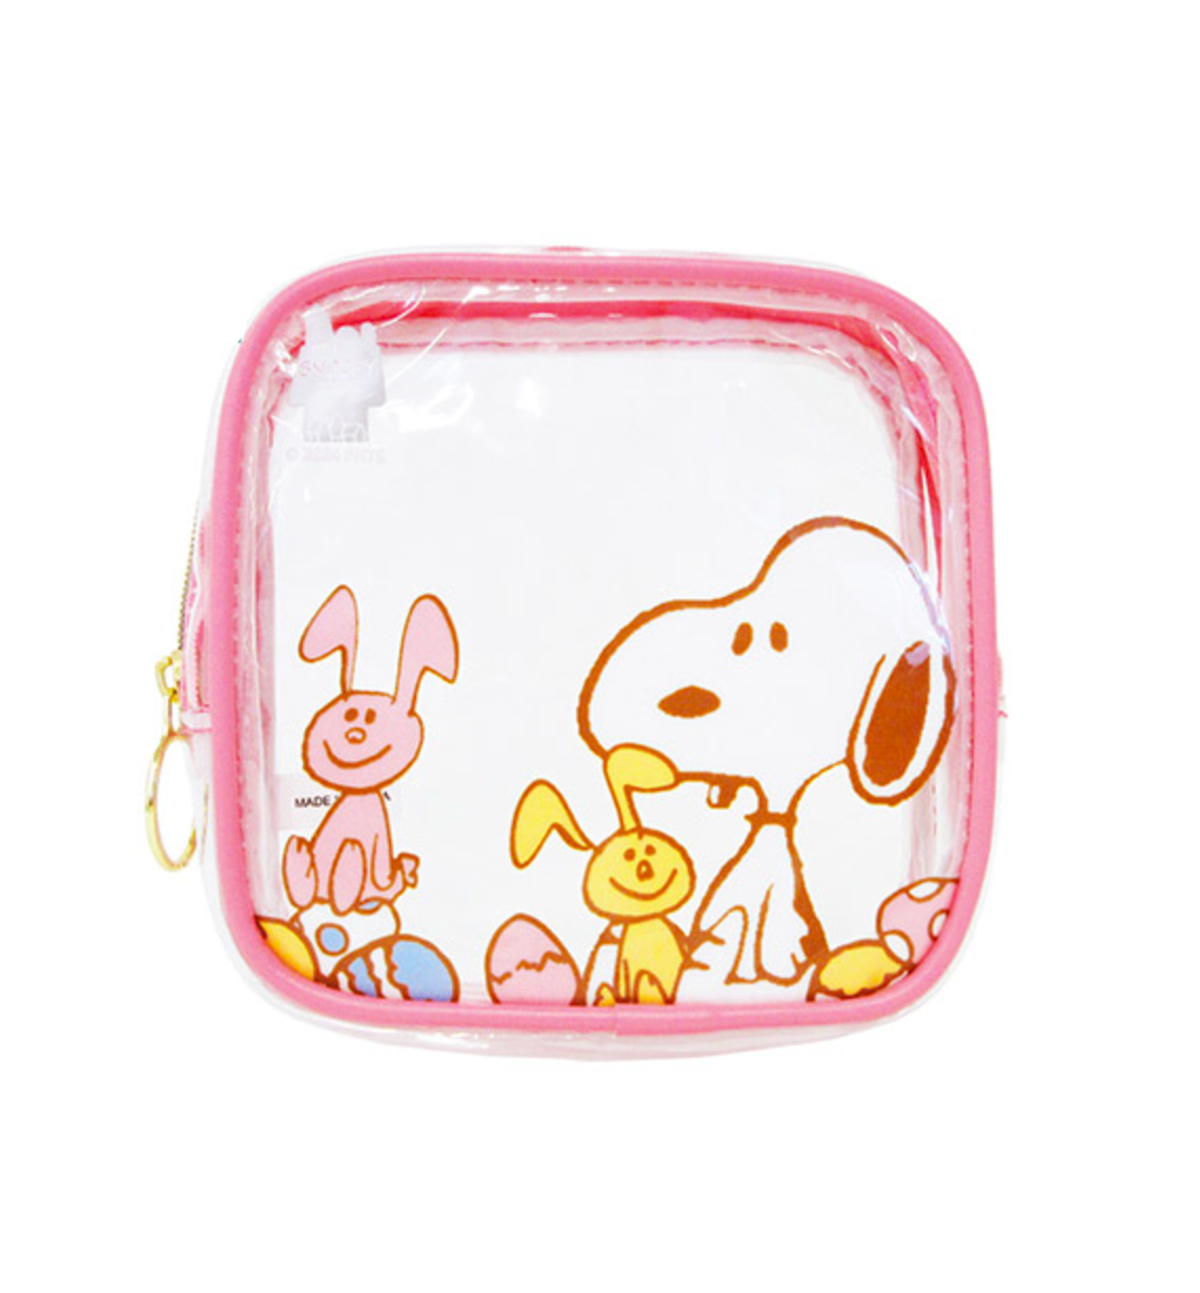 Peanuts Snoopy Clear Pouch (Fun Easter Egg Game)